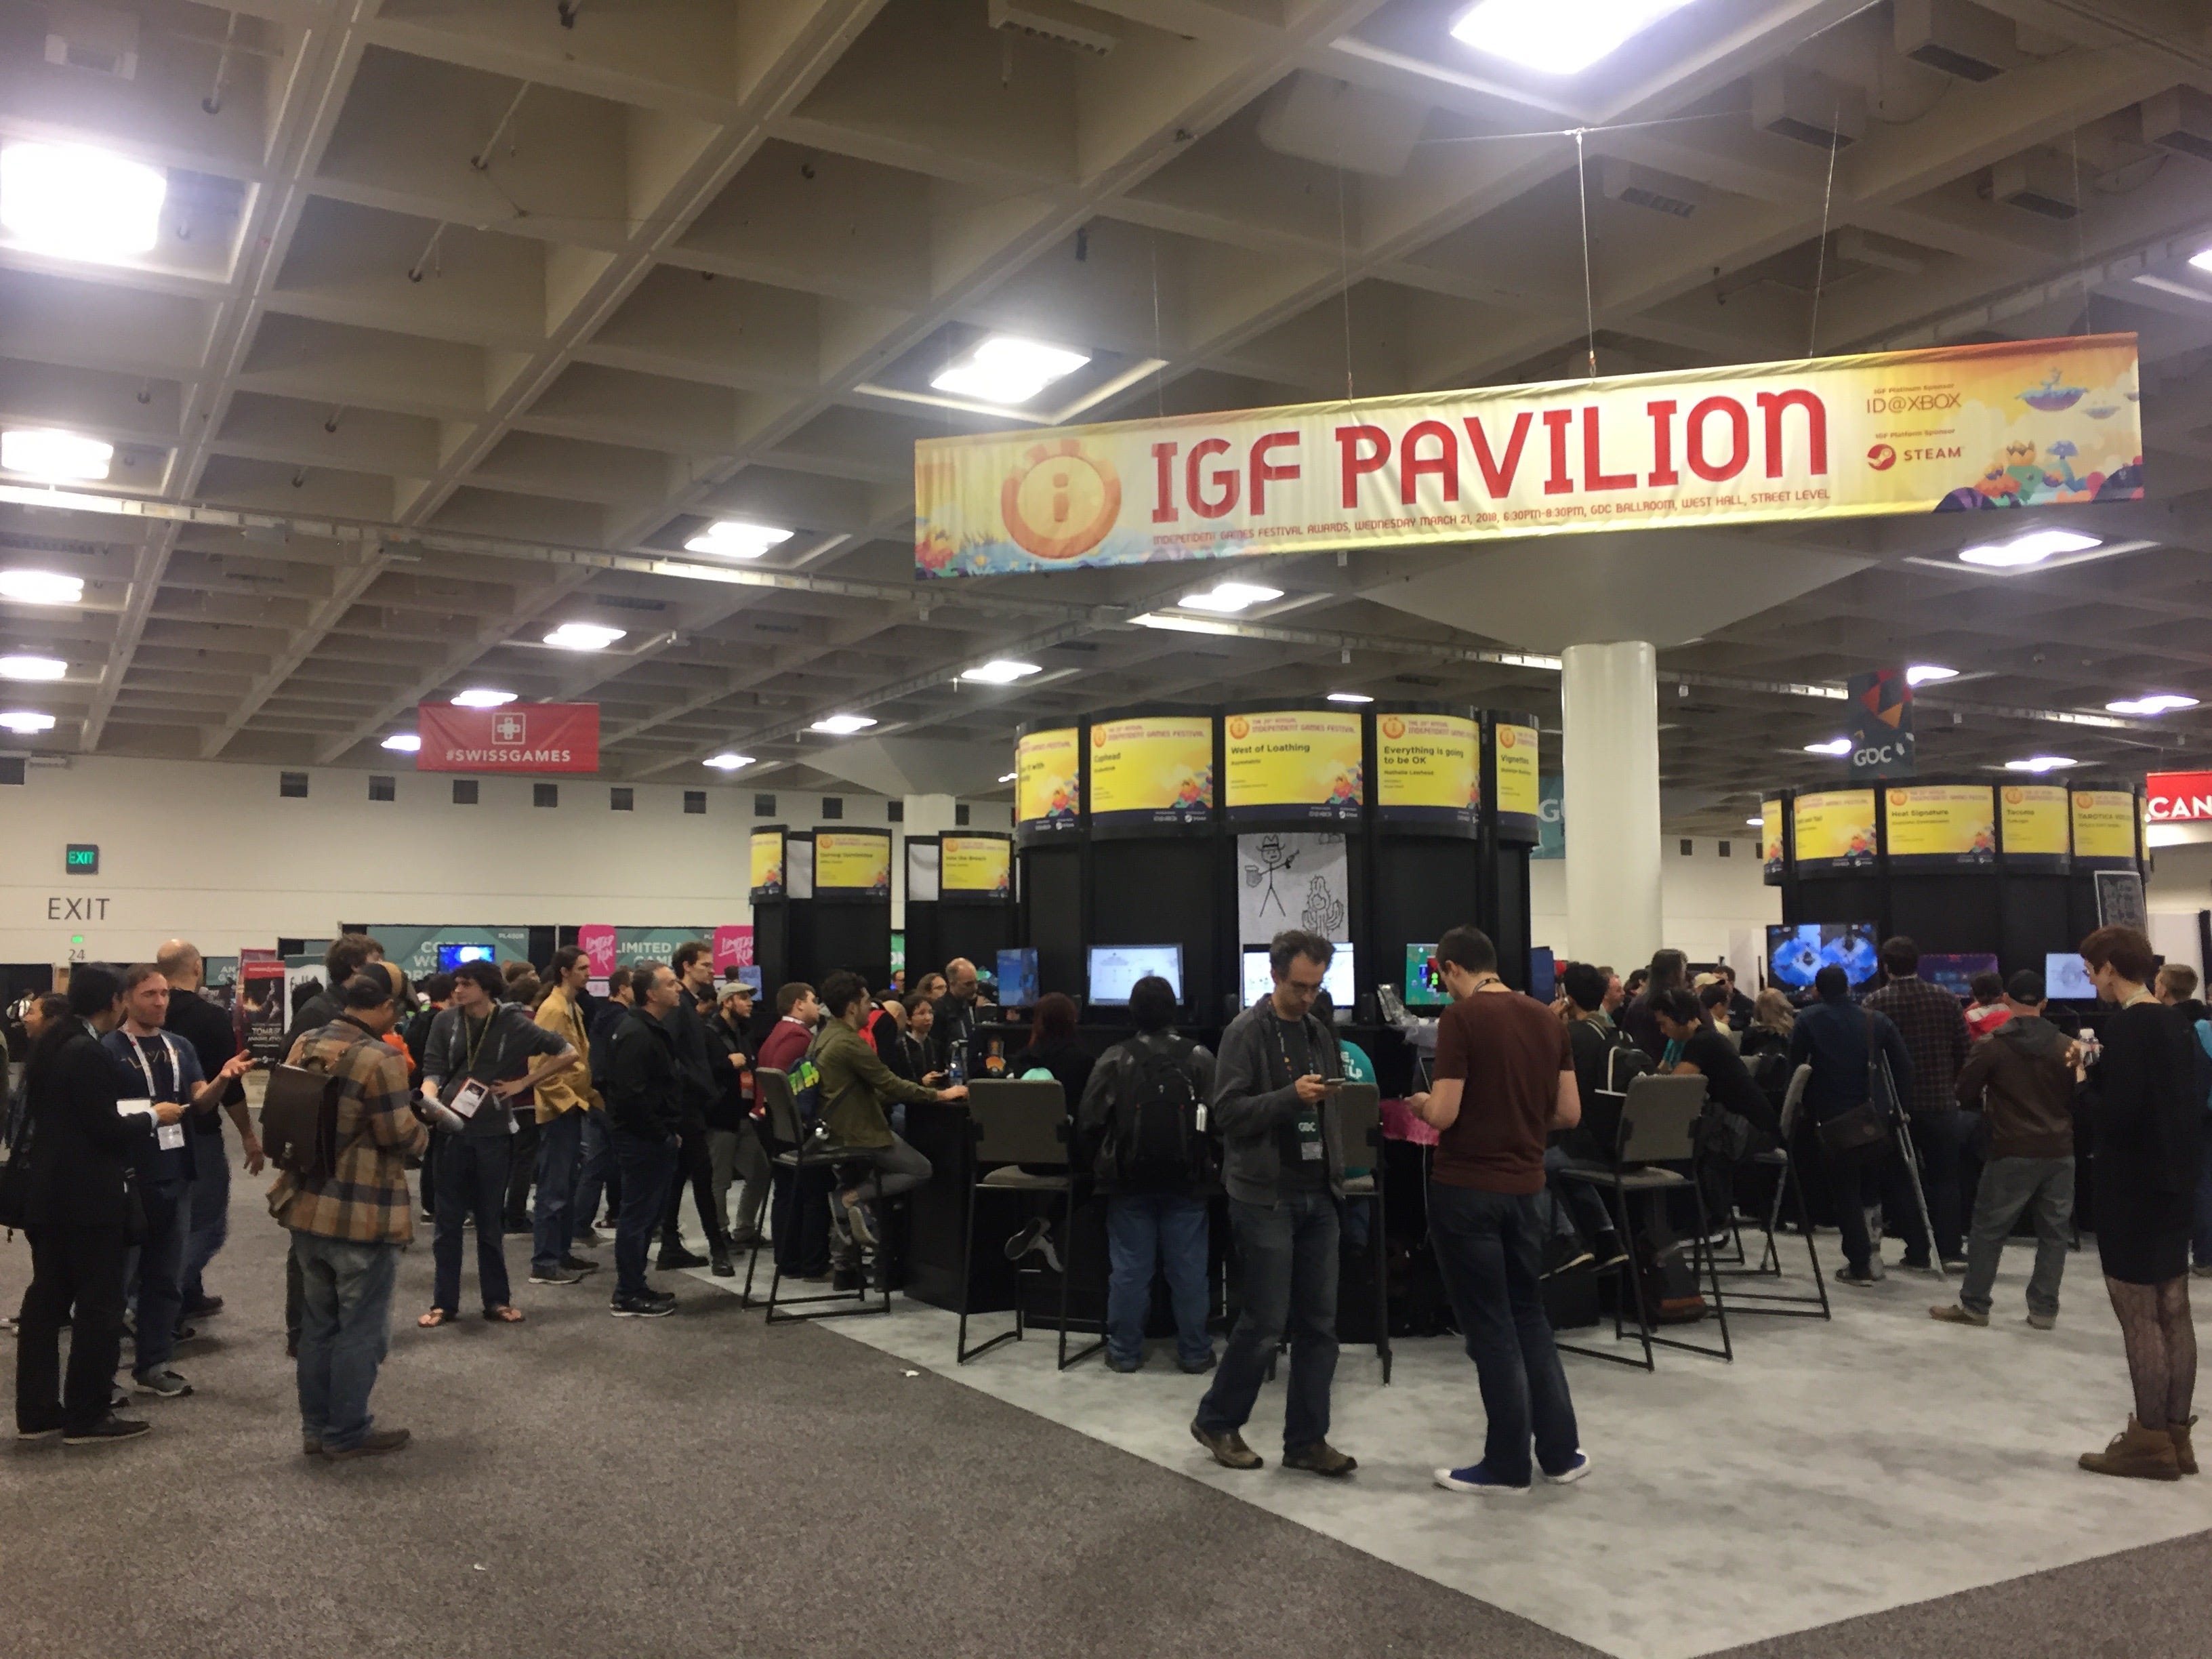 From top to down: Lost Levels, Train Jam booth, Puppet Pandemonium at the alt.crtl expo, the IGF Pavilion.